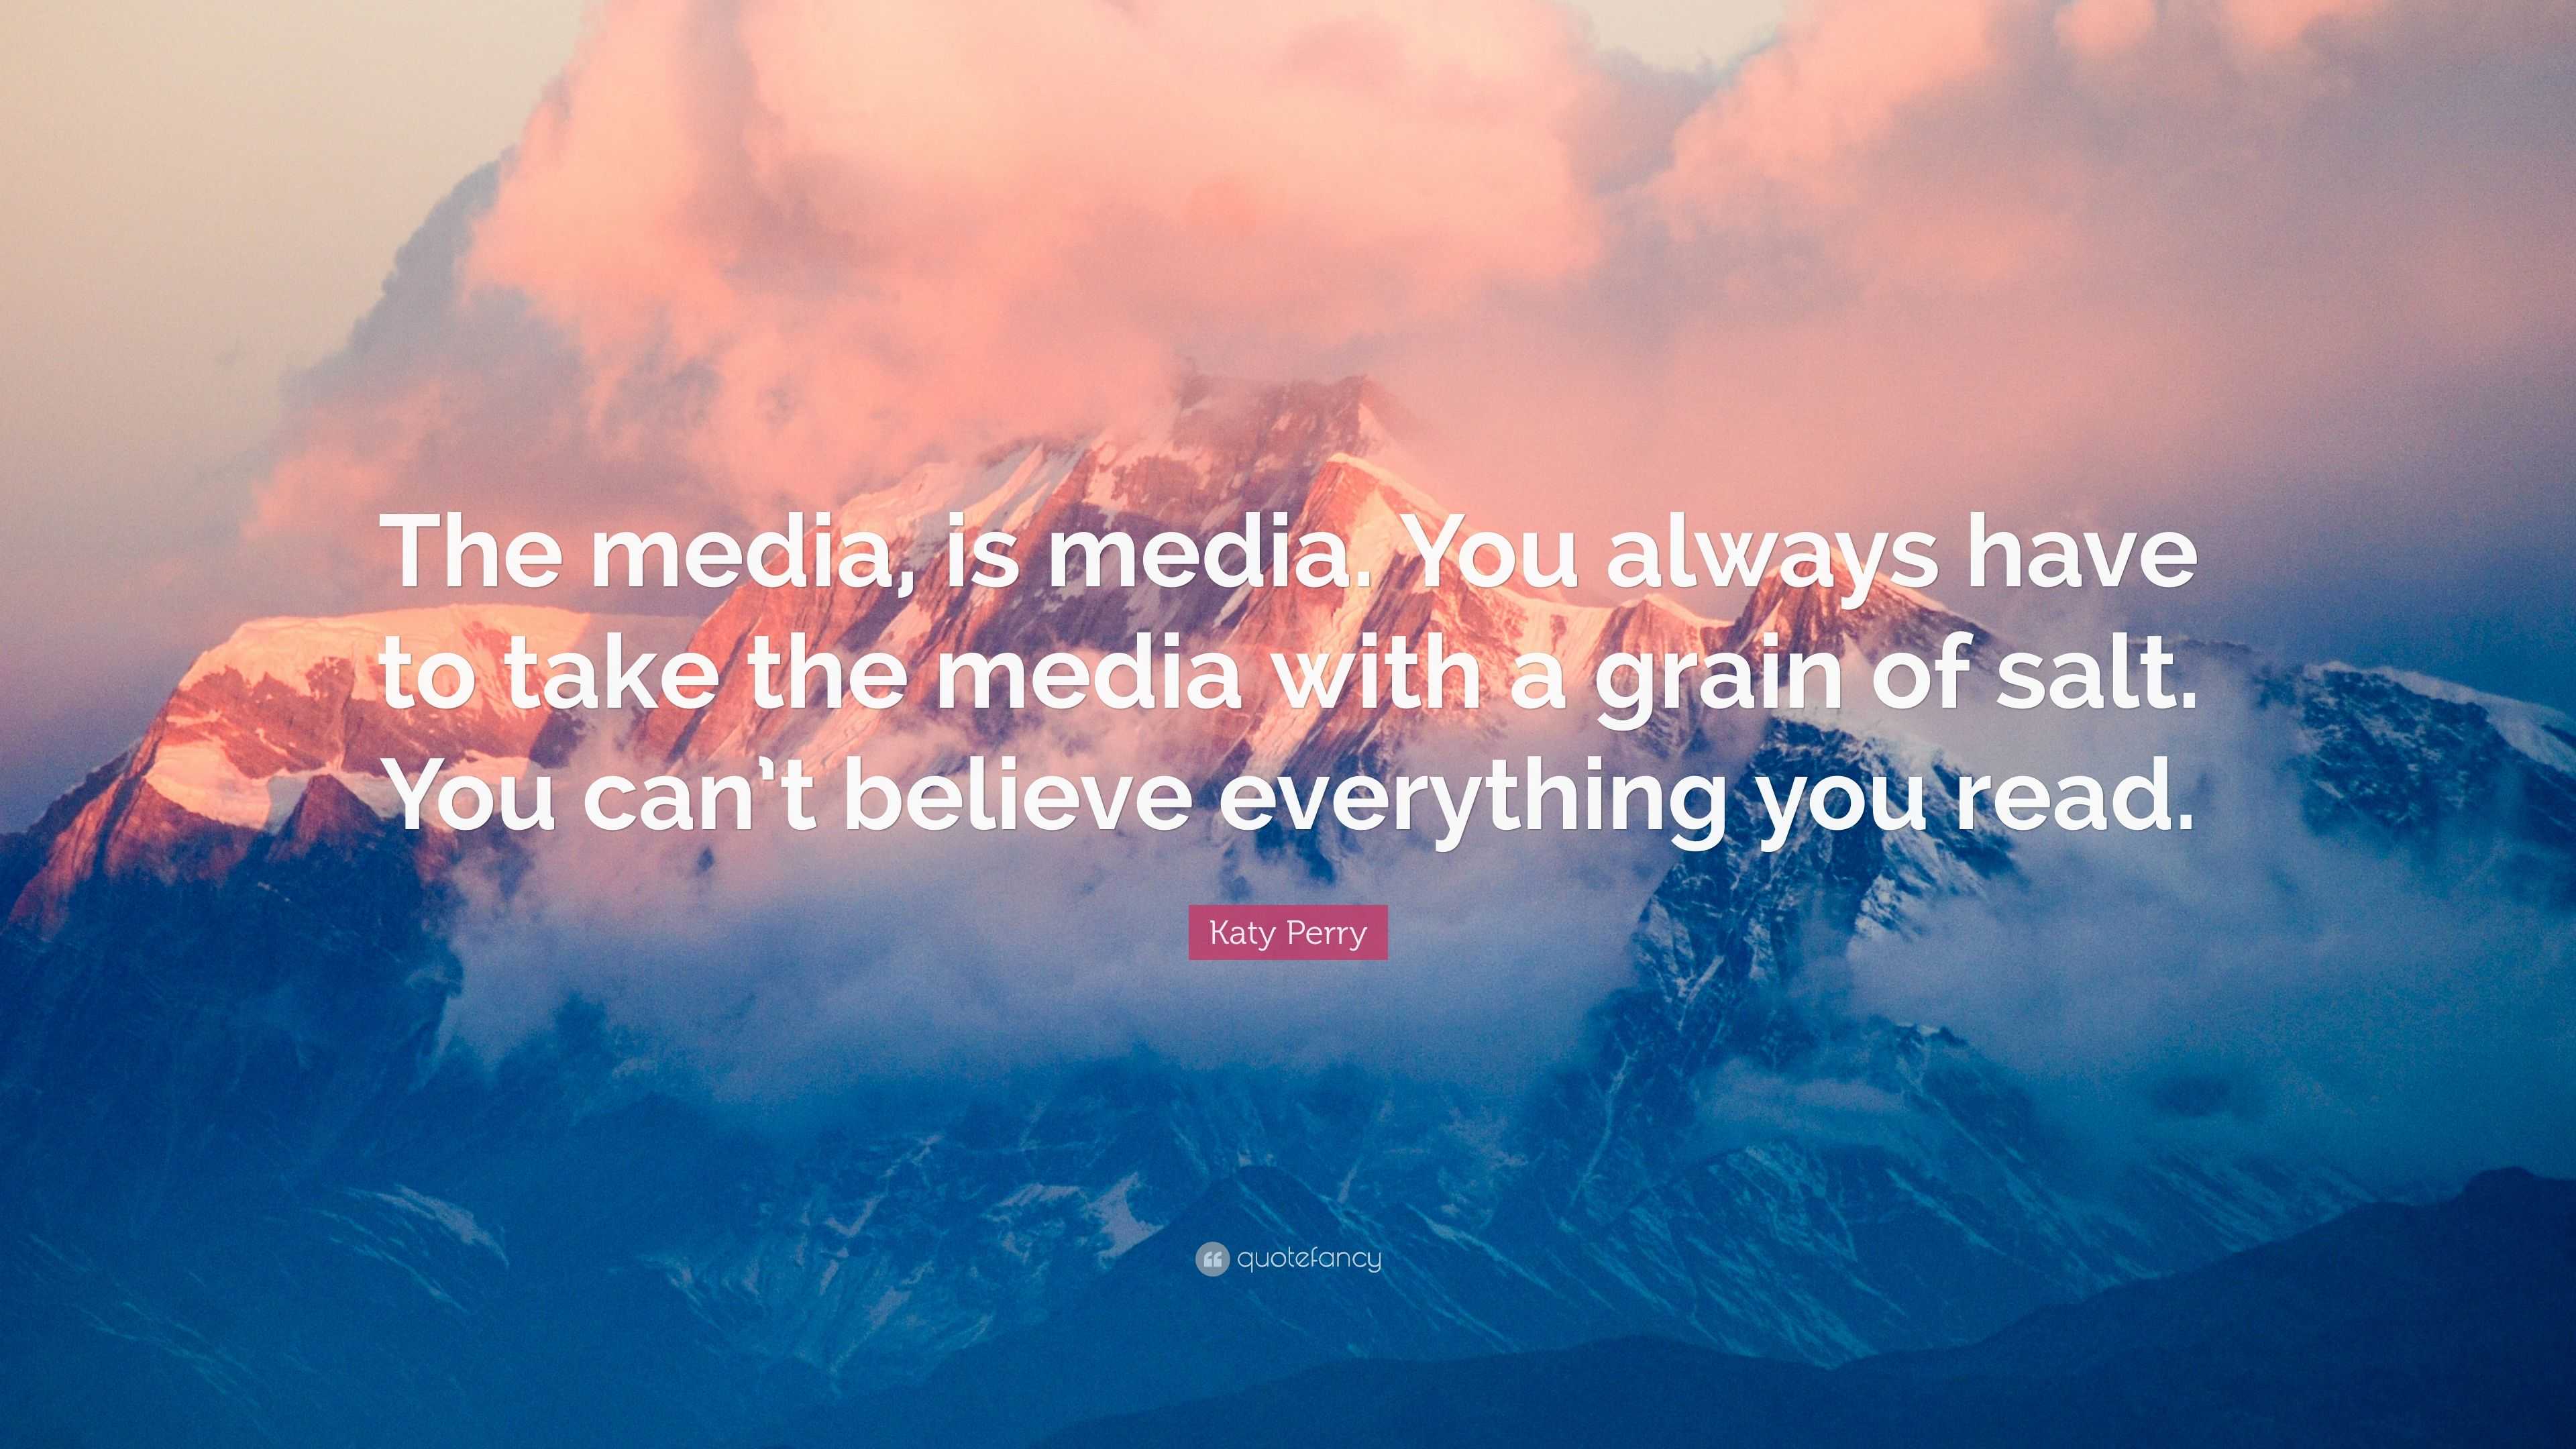 Katy Perry Quote “the Media Is Media You Always Have To Take The Media With A Grain Of Salt